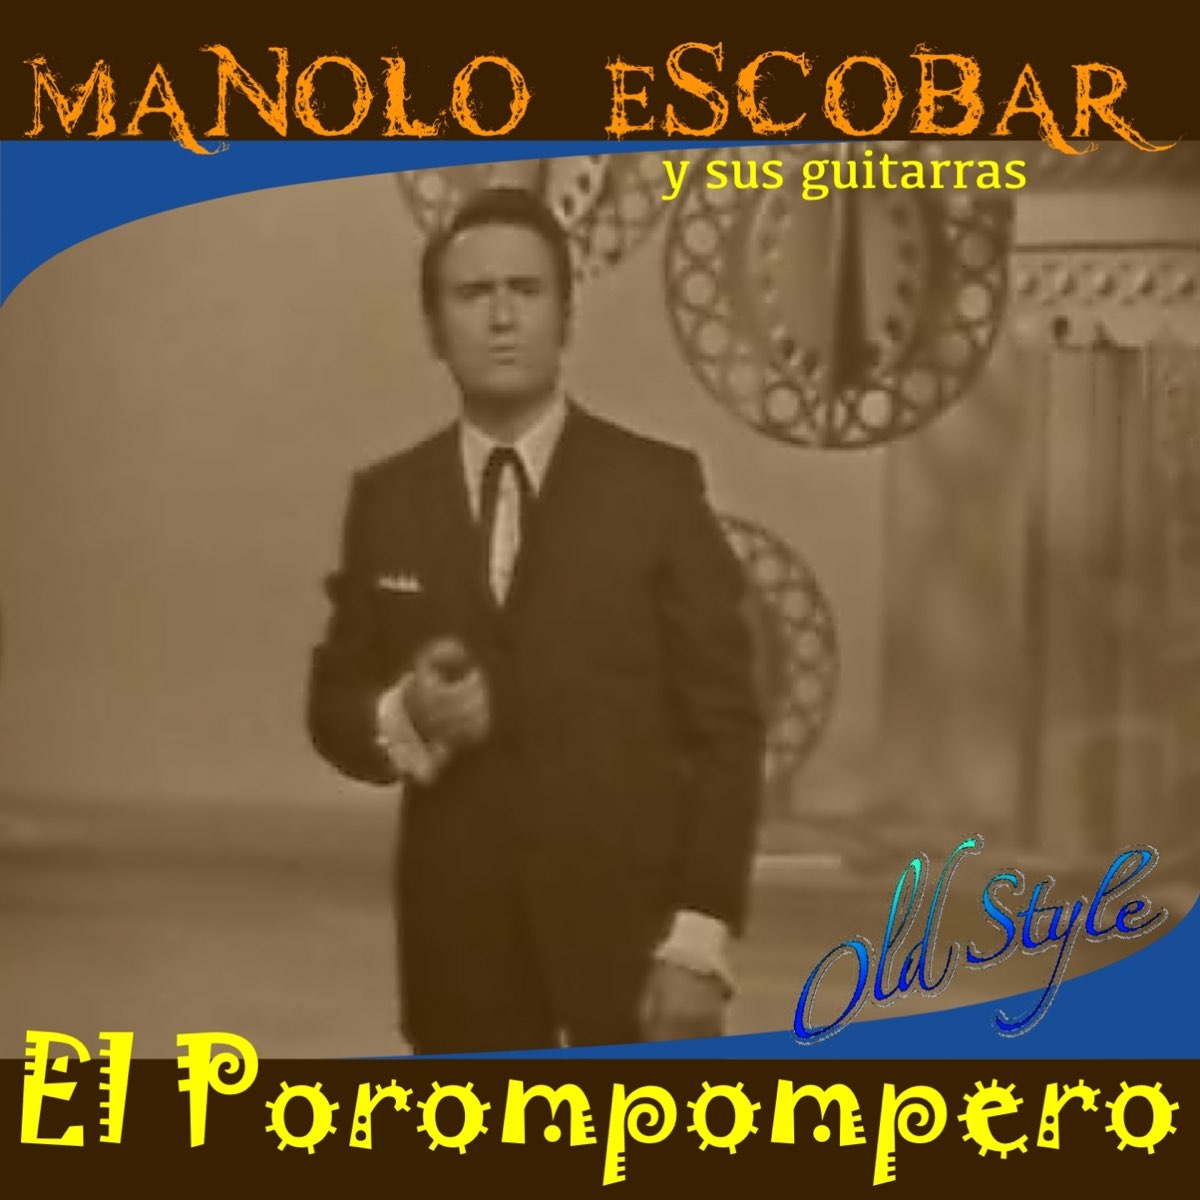 El Porompopero (Original Version From 1960 Remastered) - EP by Manolo  Escobar on Apple Music